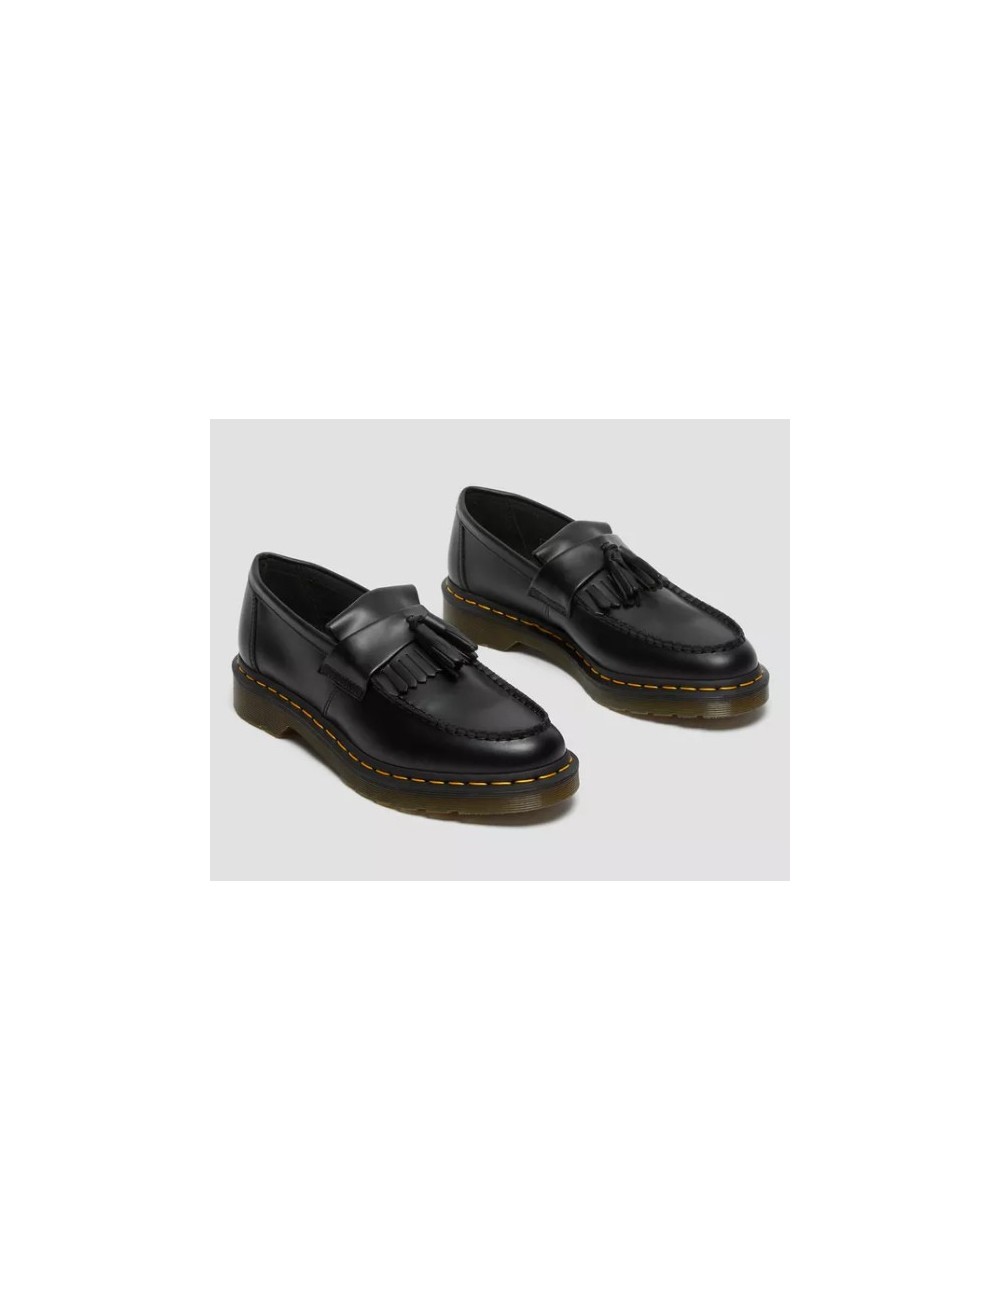 DR MARTENS ADRIAN YELLOW STITCH SMOOTH LEATHER TASSEL LOAFERS